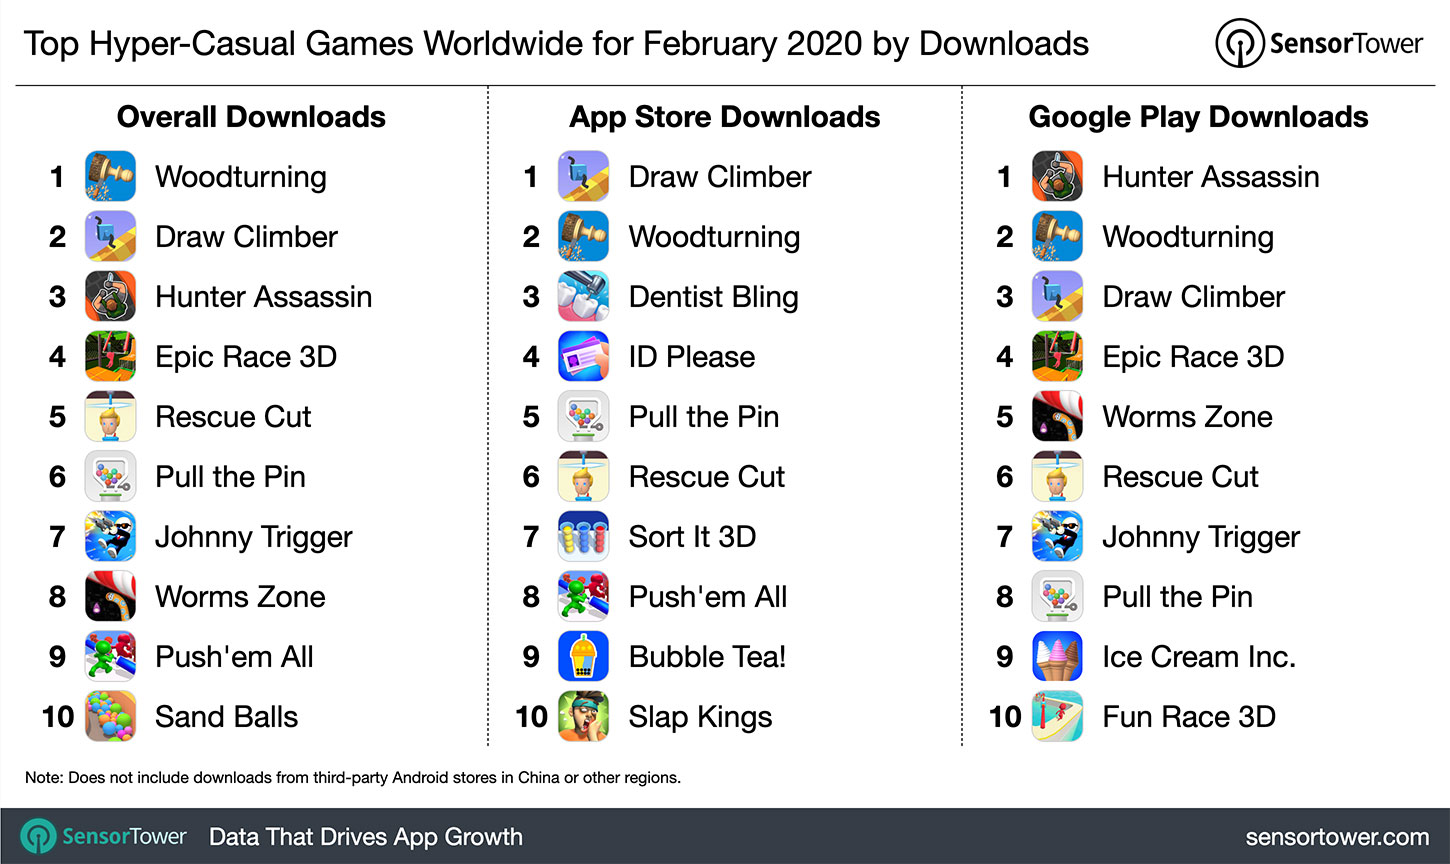 Top Hyper-Casual Games Worldwide for February 2020 by Downloads